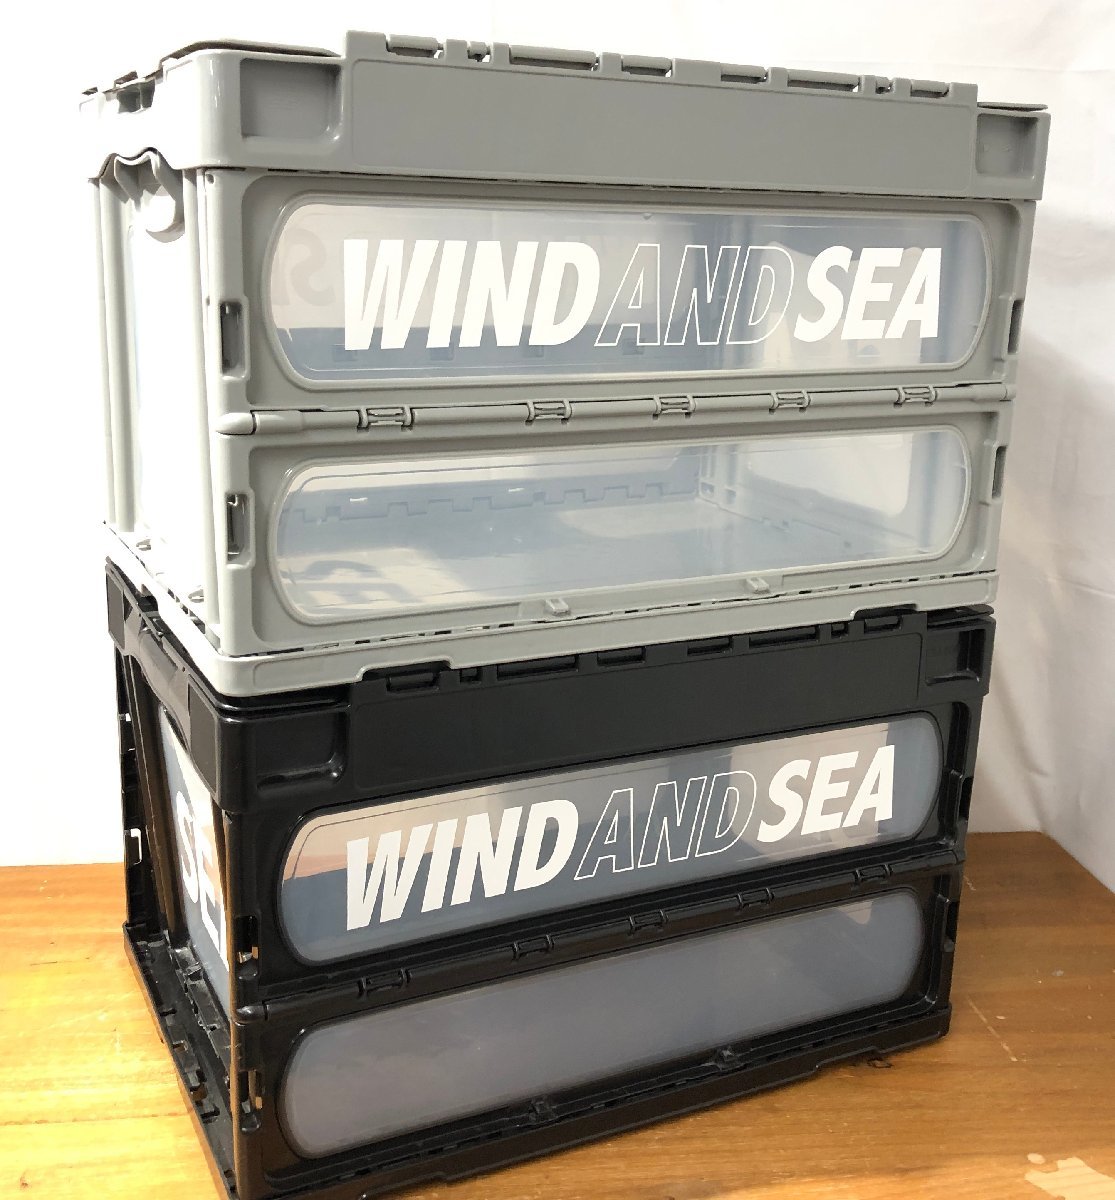 Yahoo!オークション - WIND AND SEA CONTAINER BOX 2個